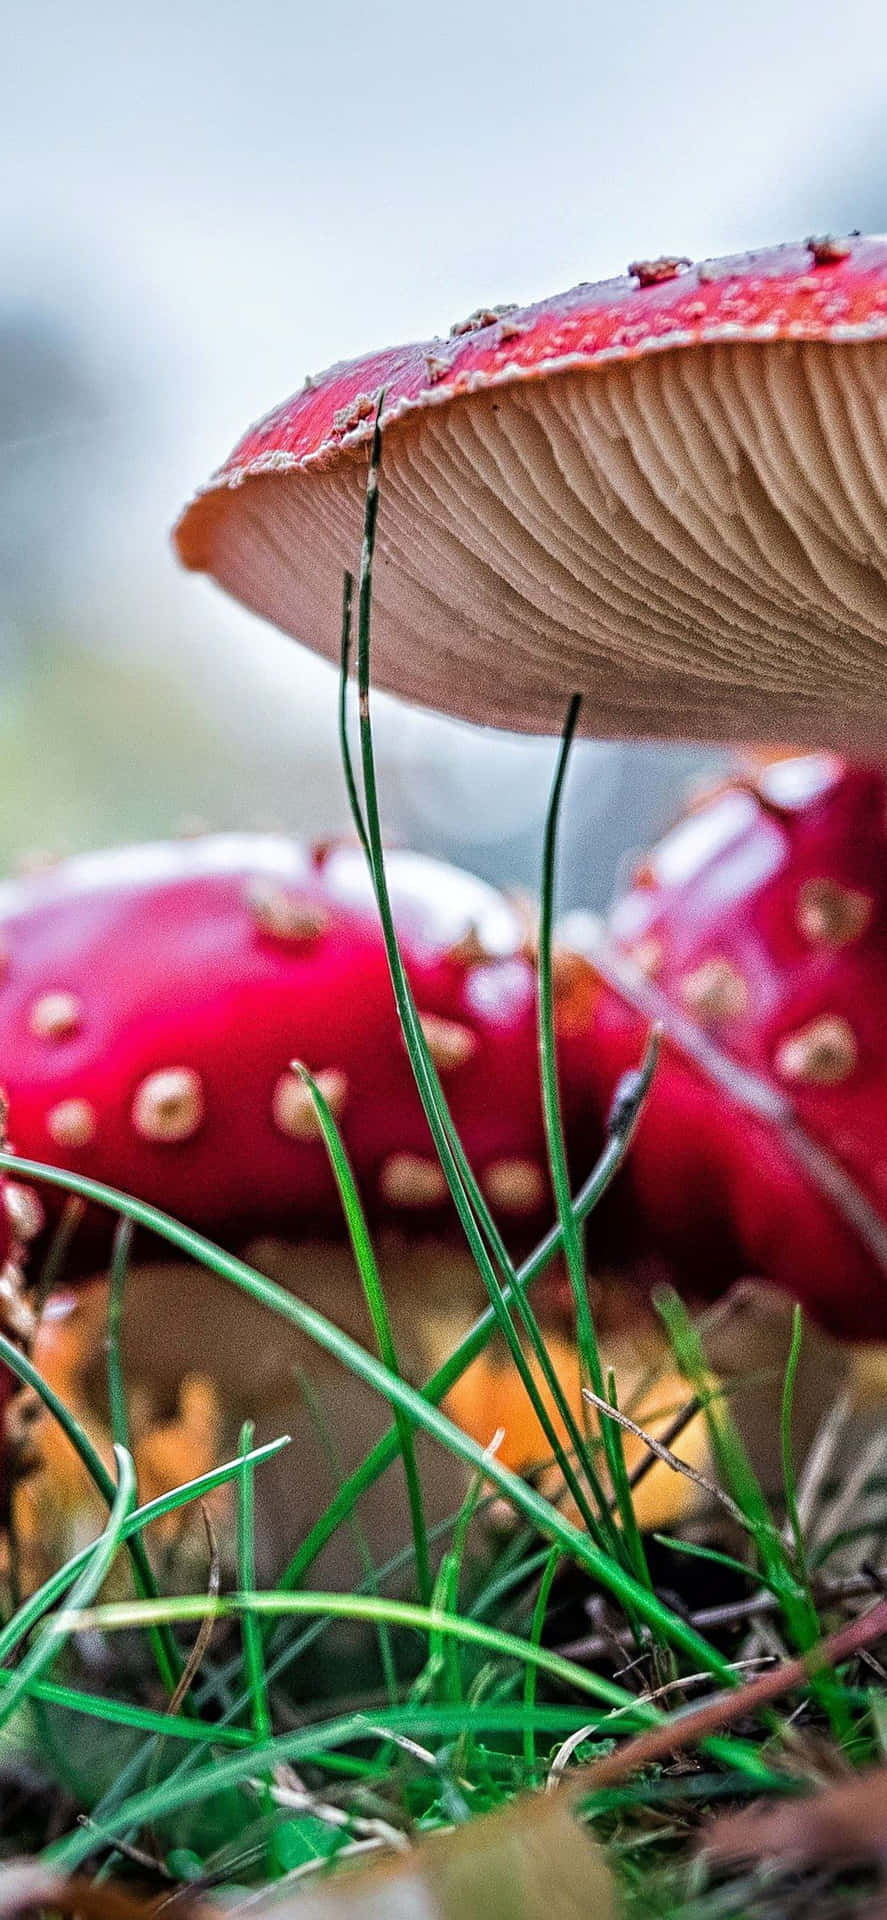 Red Mushrooms On The Ground With Grass Wallpaper